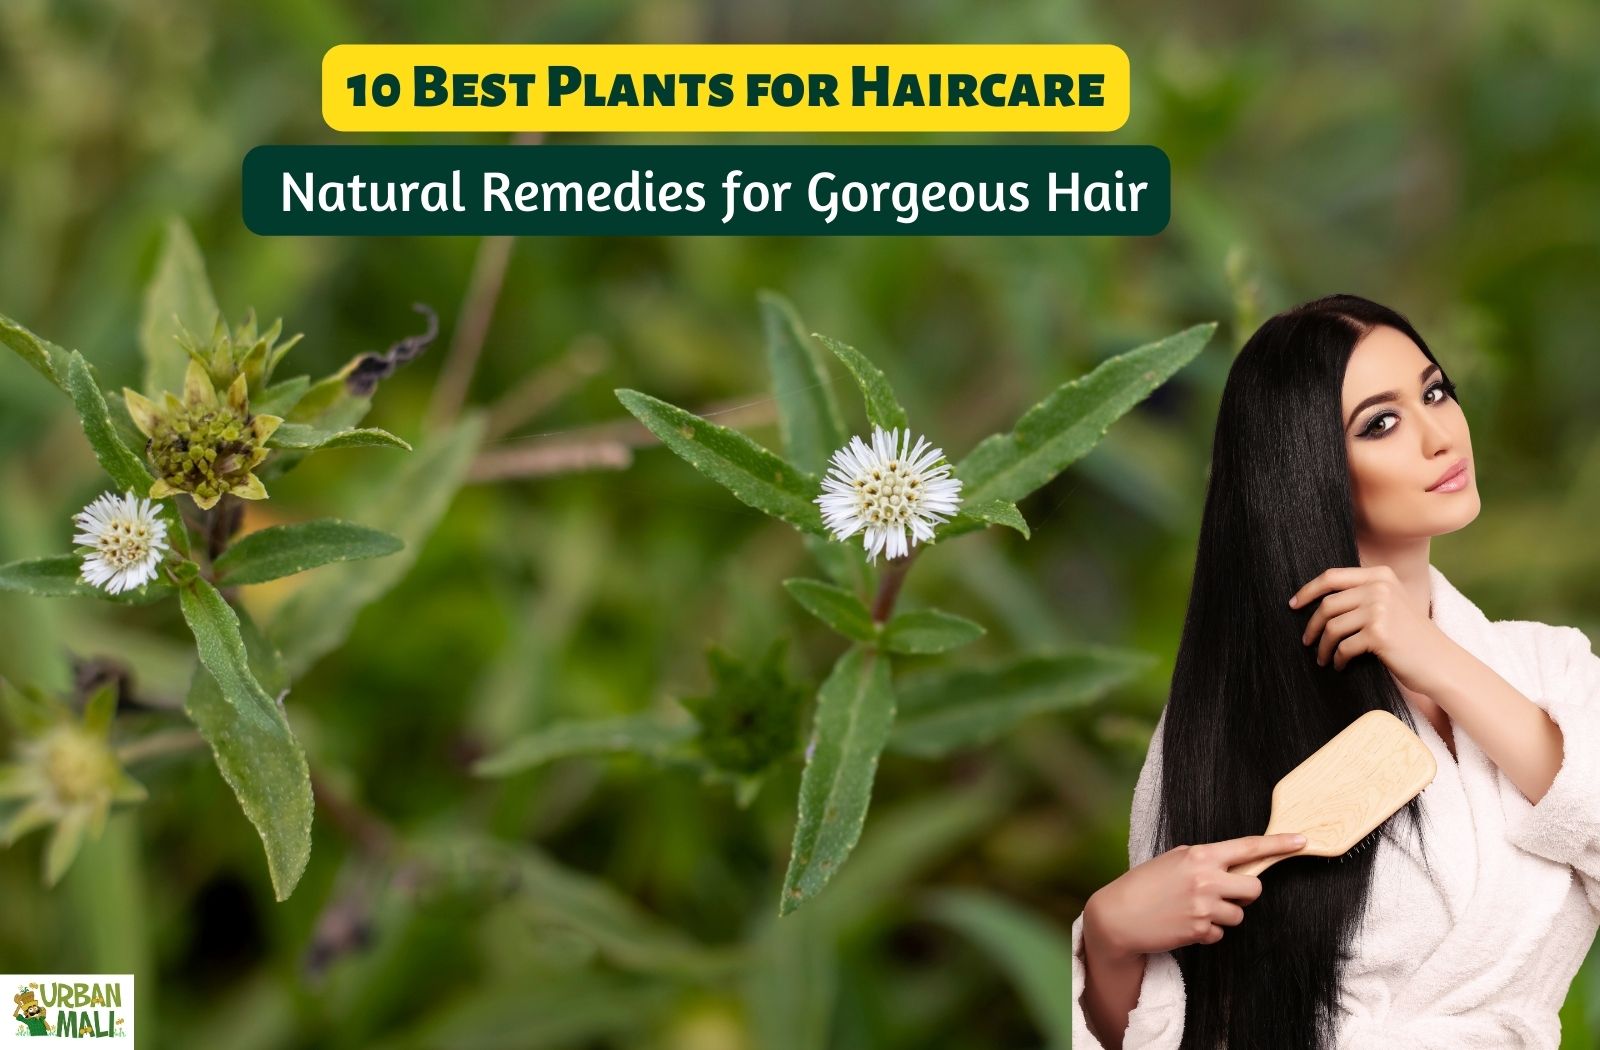 10 Best Plants for Haircare: Natural Remedies for Gorgeous Hair